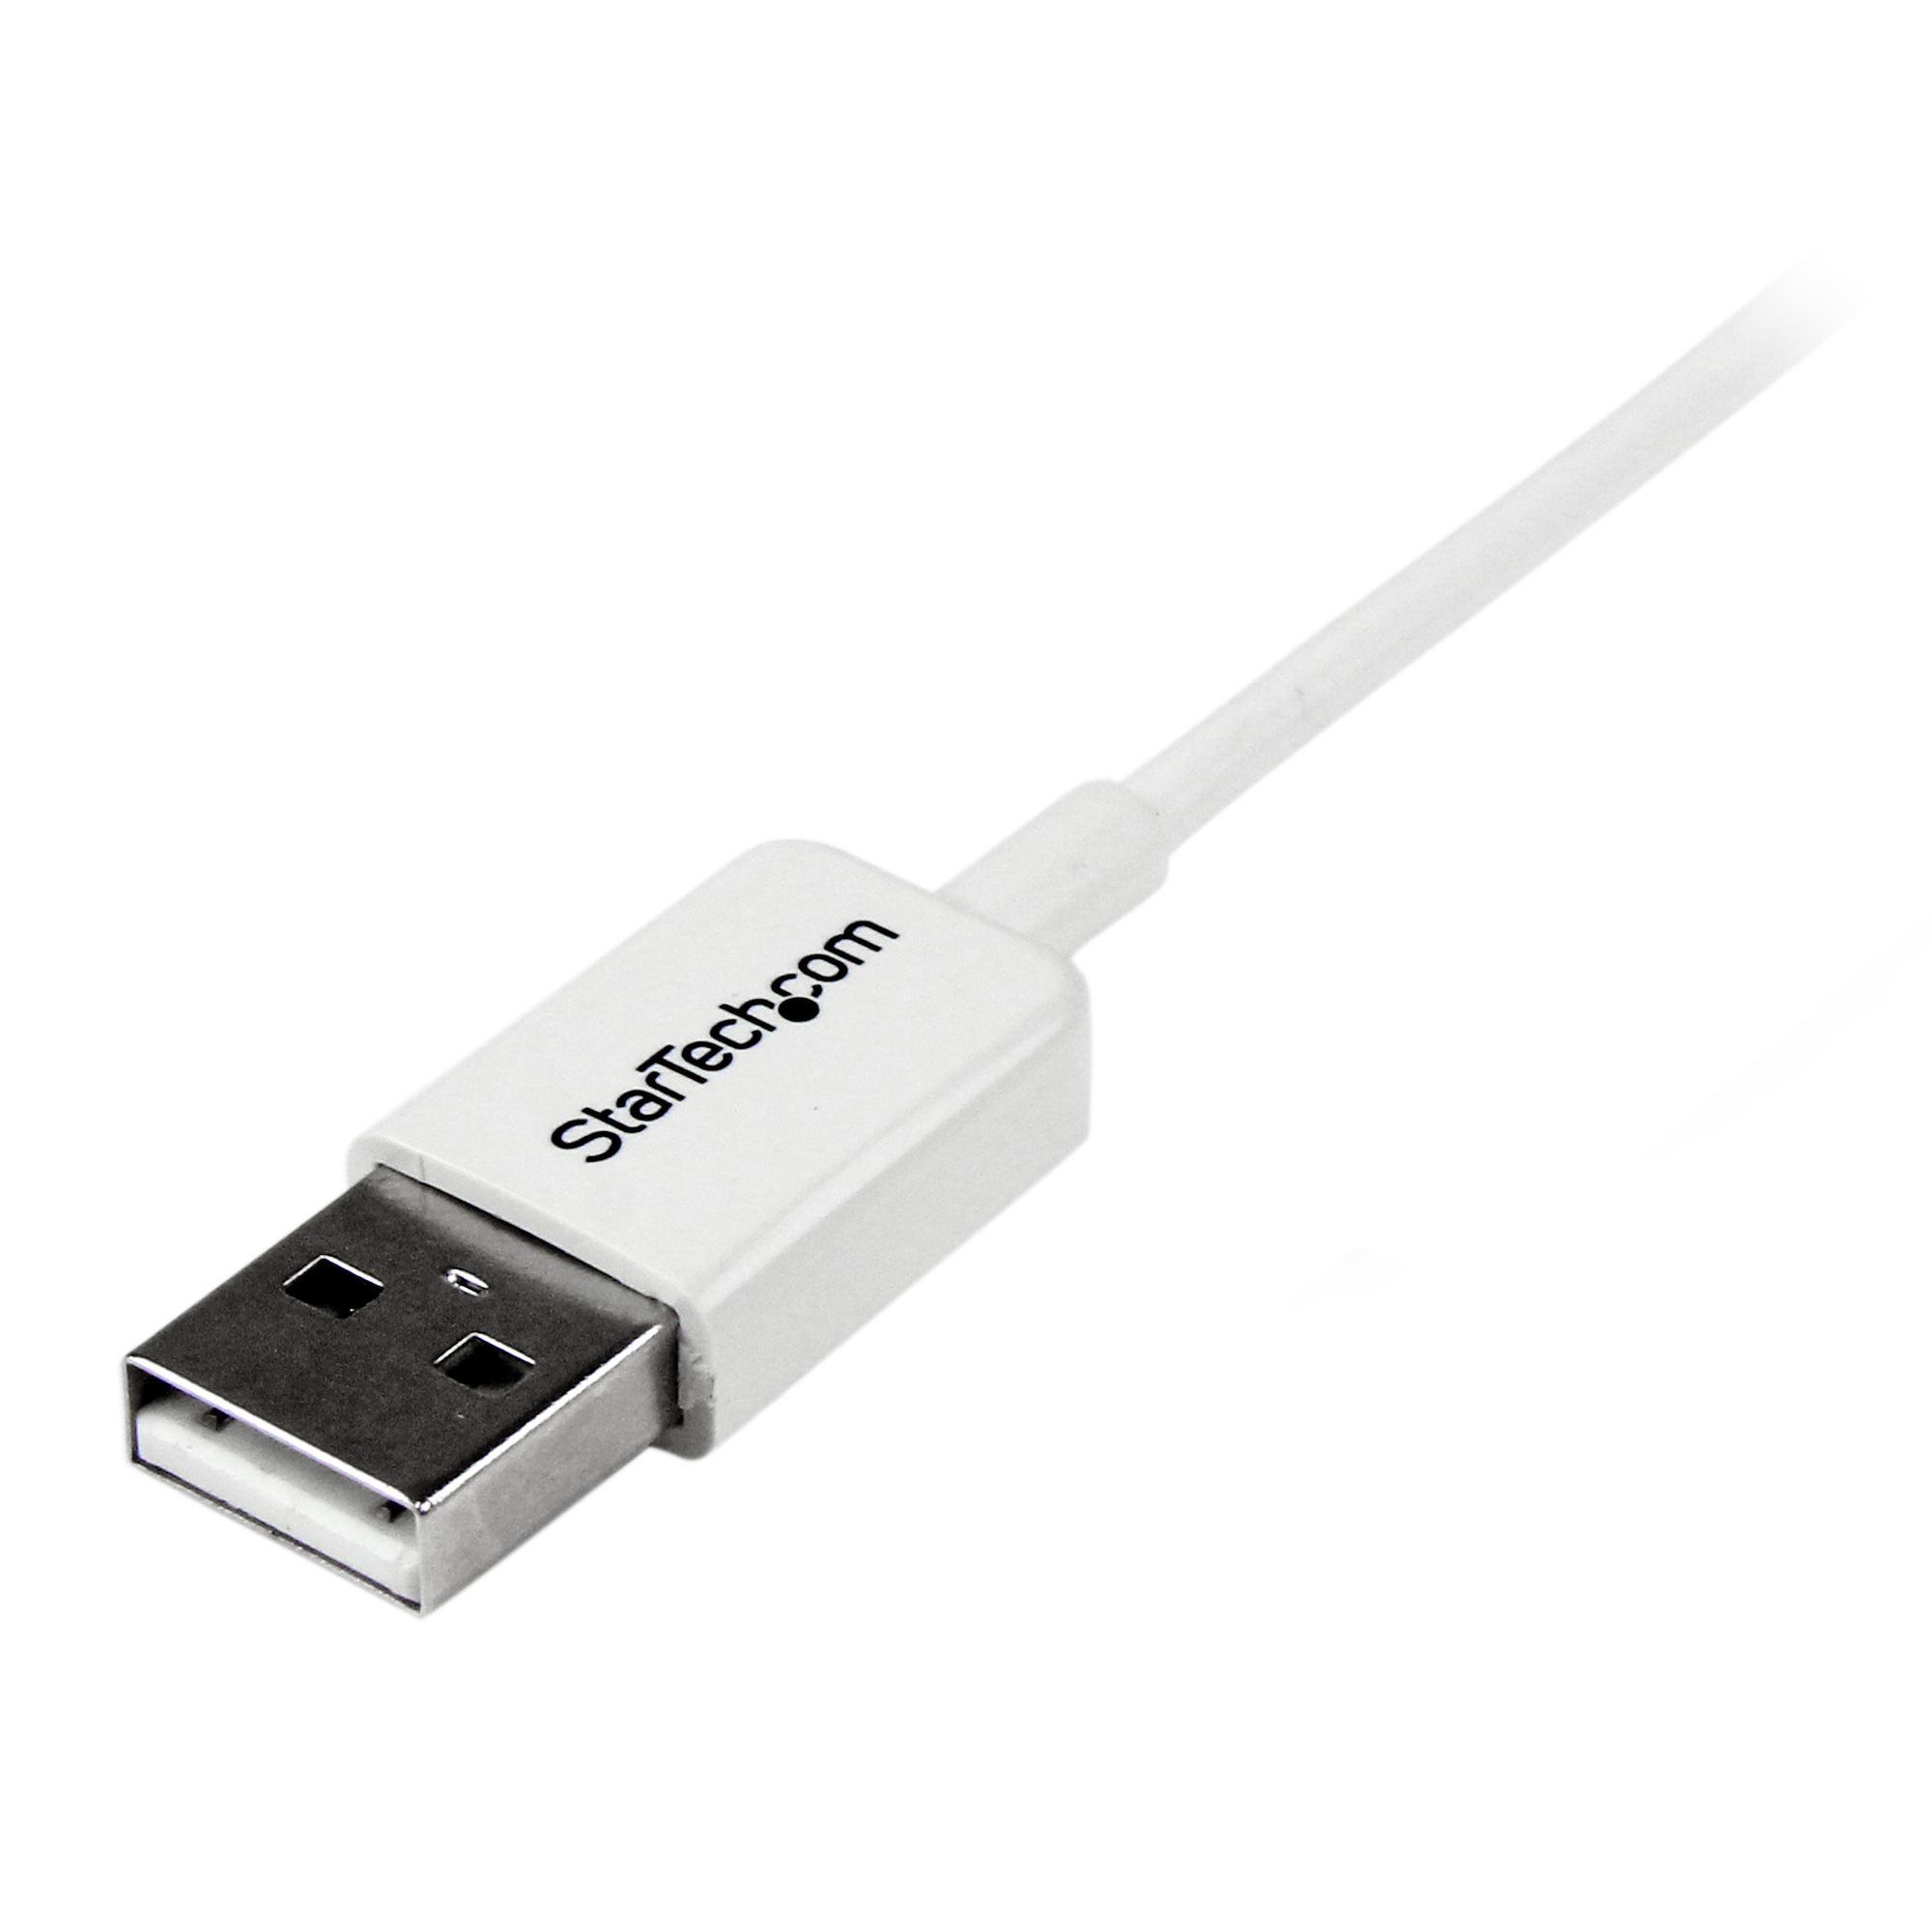 USB-A to USB-B Cable (2 meter)